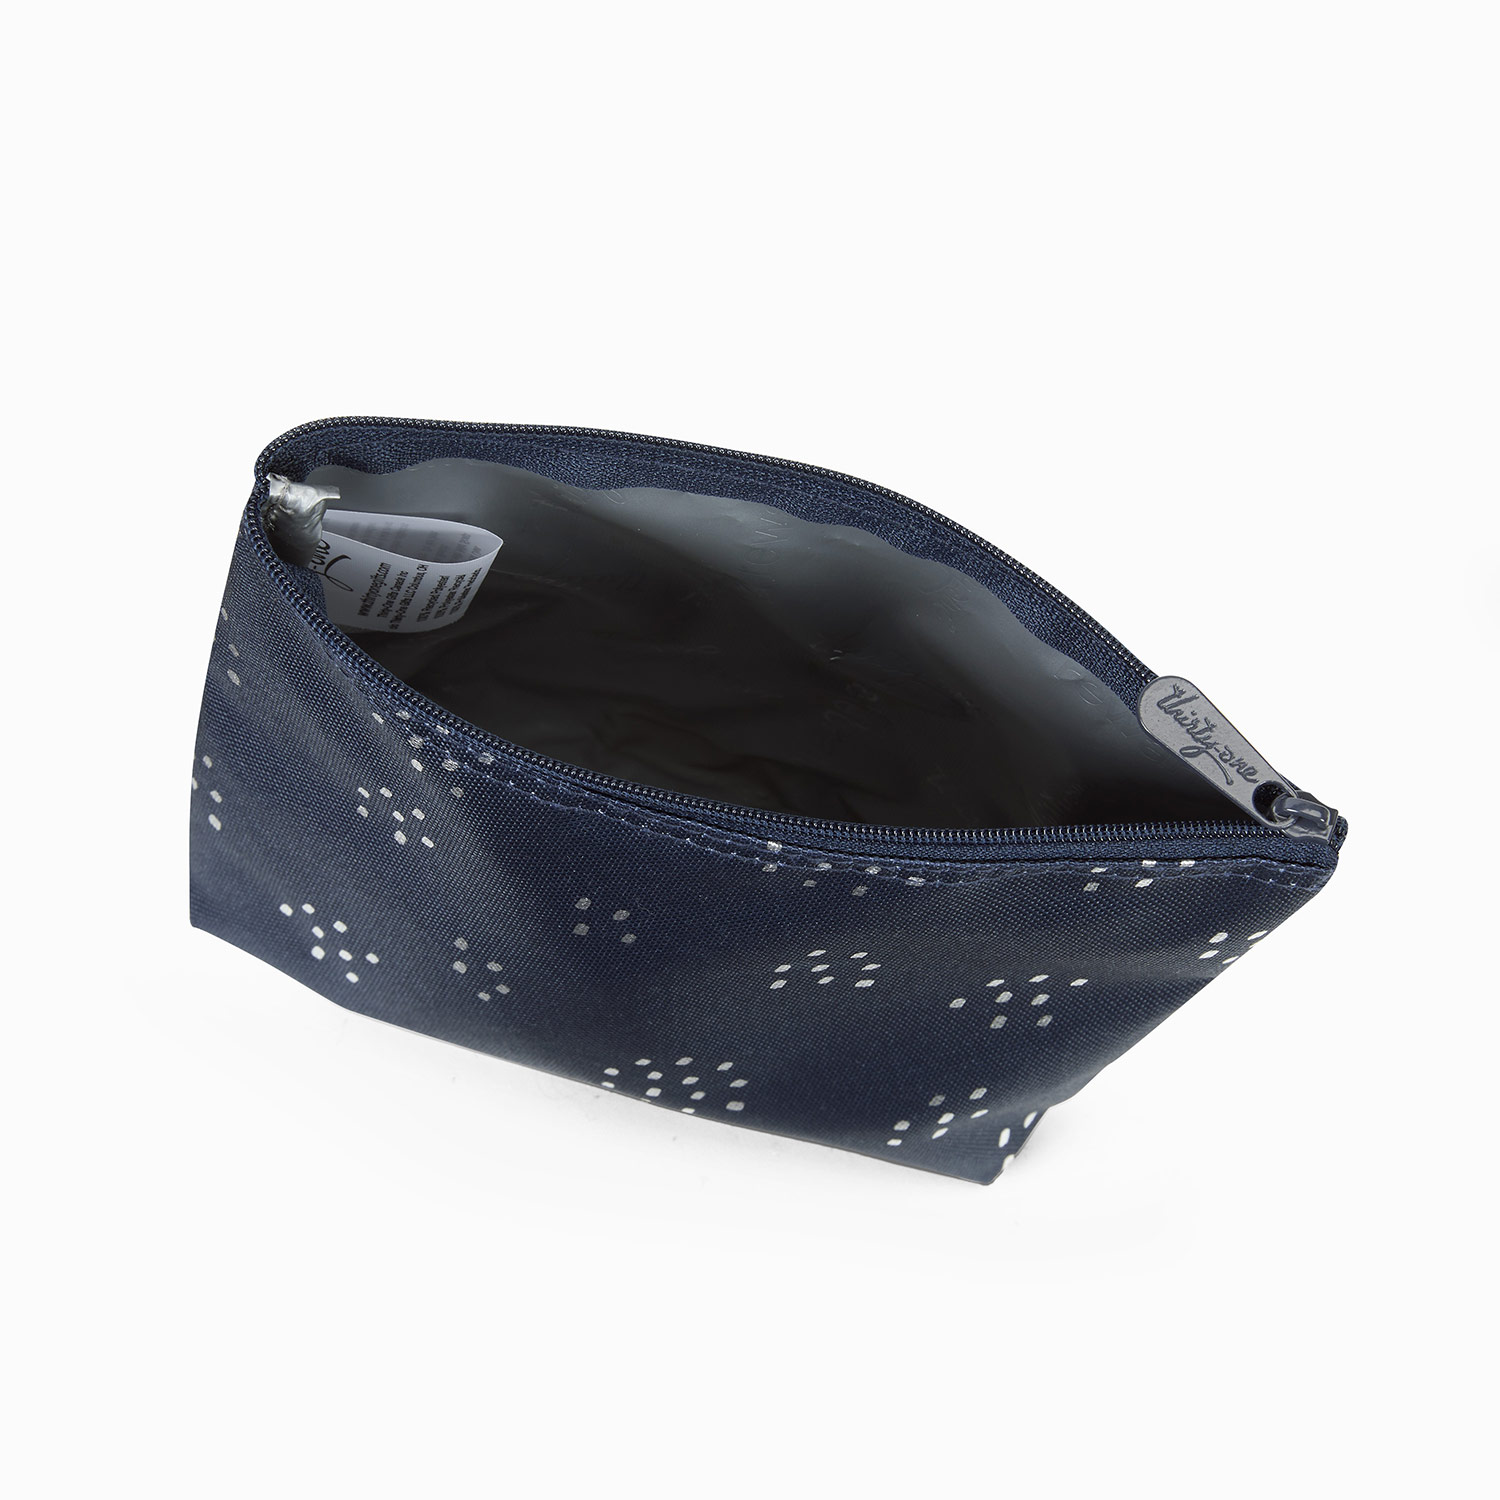 Hocus Pocus Cauldron - Snack & Go Pouch - Thirty-One Gifts - Affordable  Purses, Totes & Bags